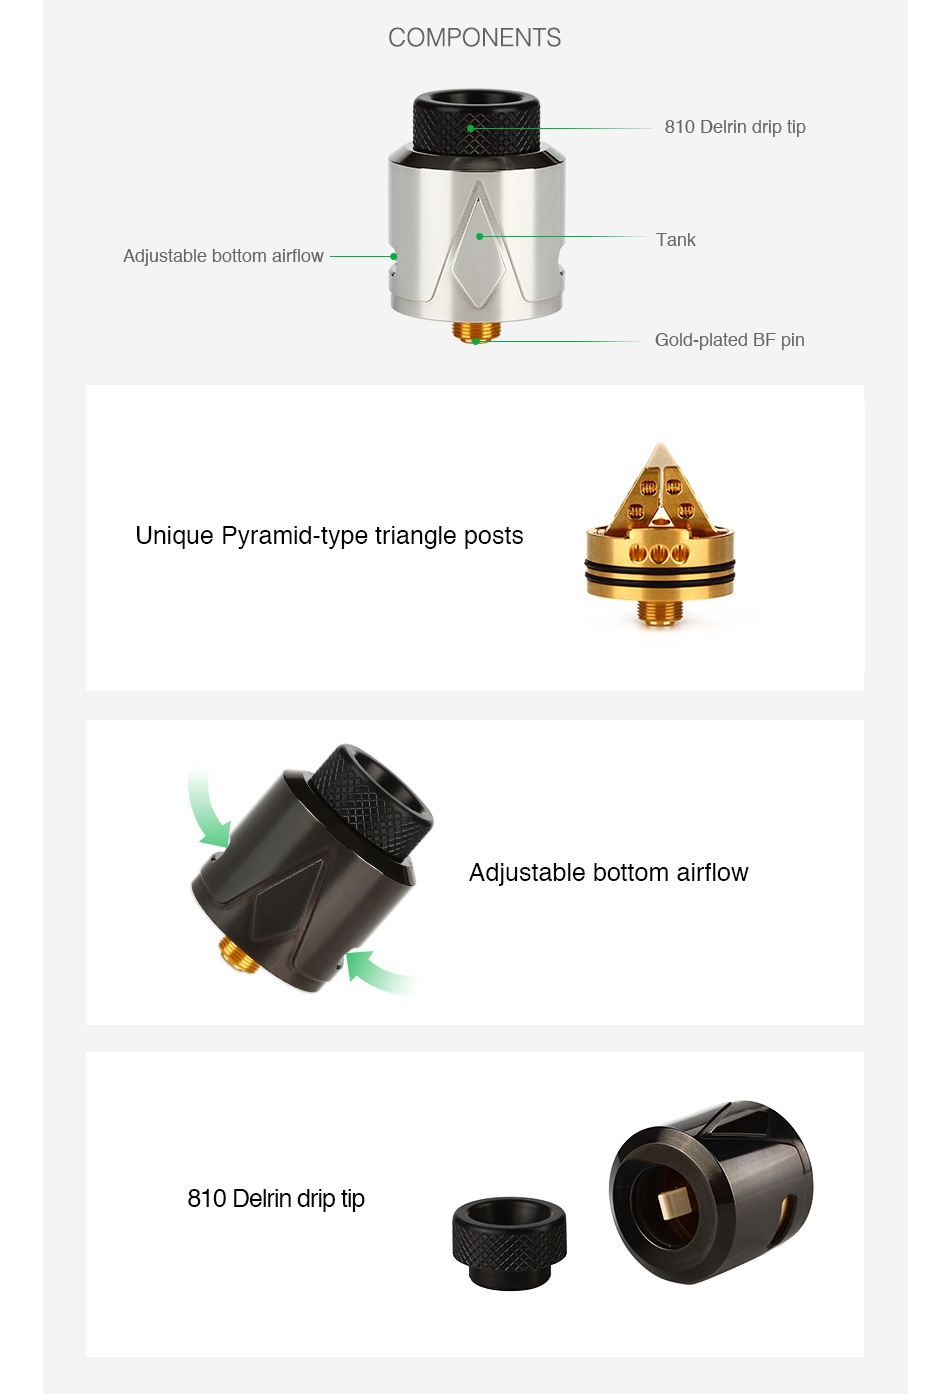 SMOKJOY Pyramid BF RDA COMPONENTS 810 Delrin drip tip Adjustable bottom airflow Gold plated BF pir Unique Pyramid type triangle posts Adjustable bottom airflow 810 Delrin drip tip